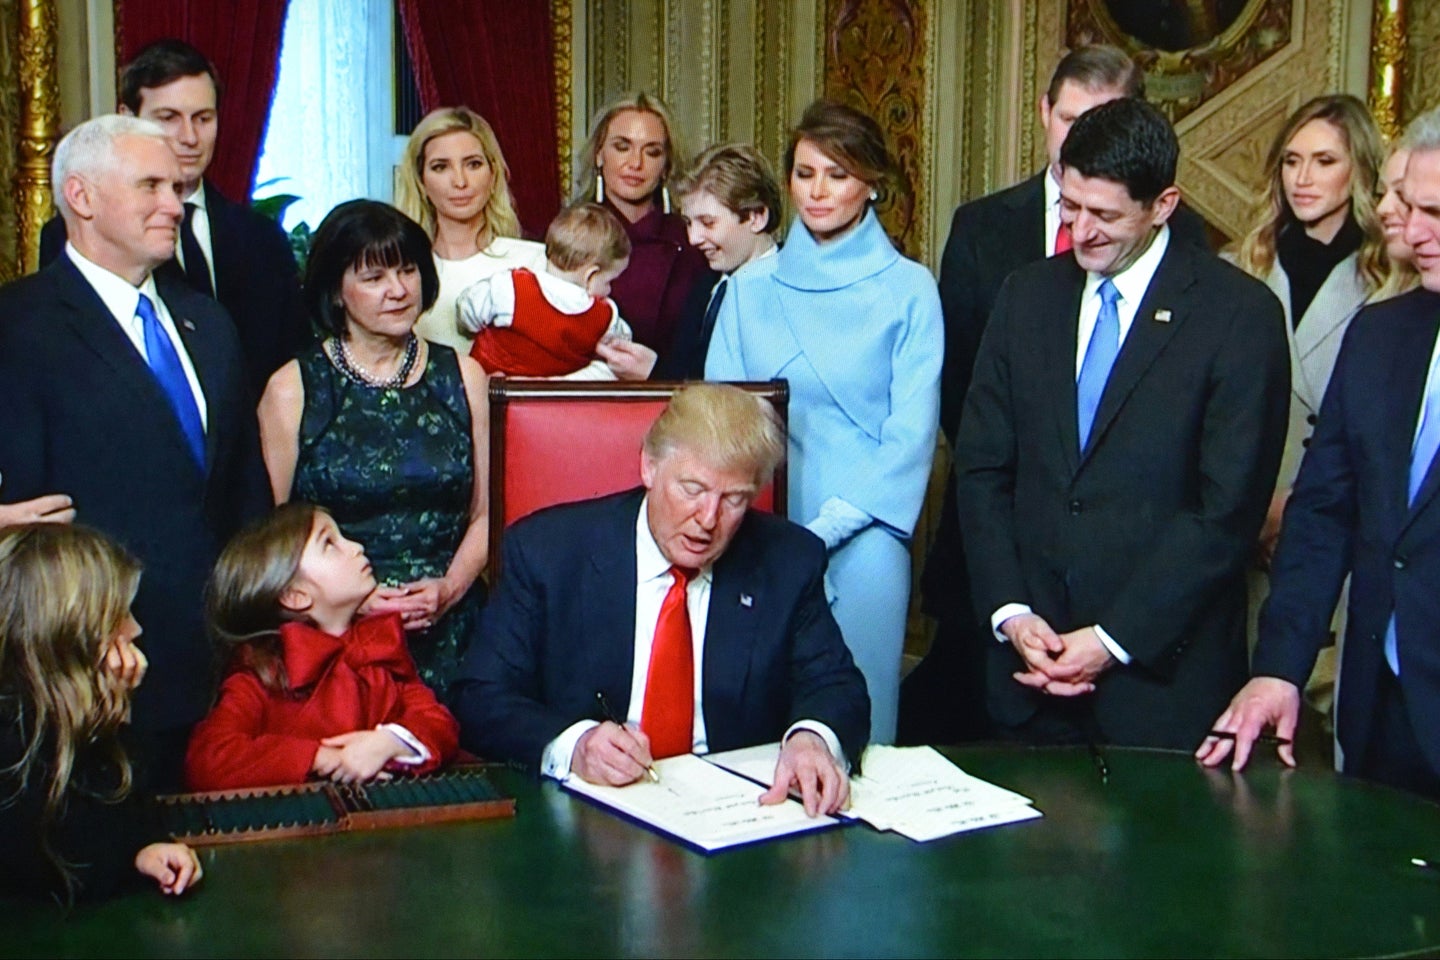 President Donald Trump signing an executive order in the White House in 2017